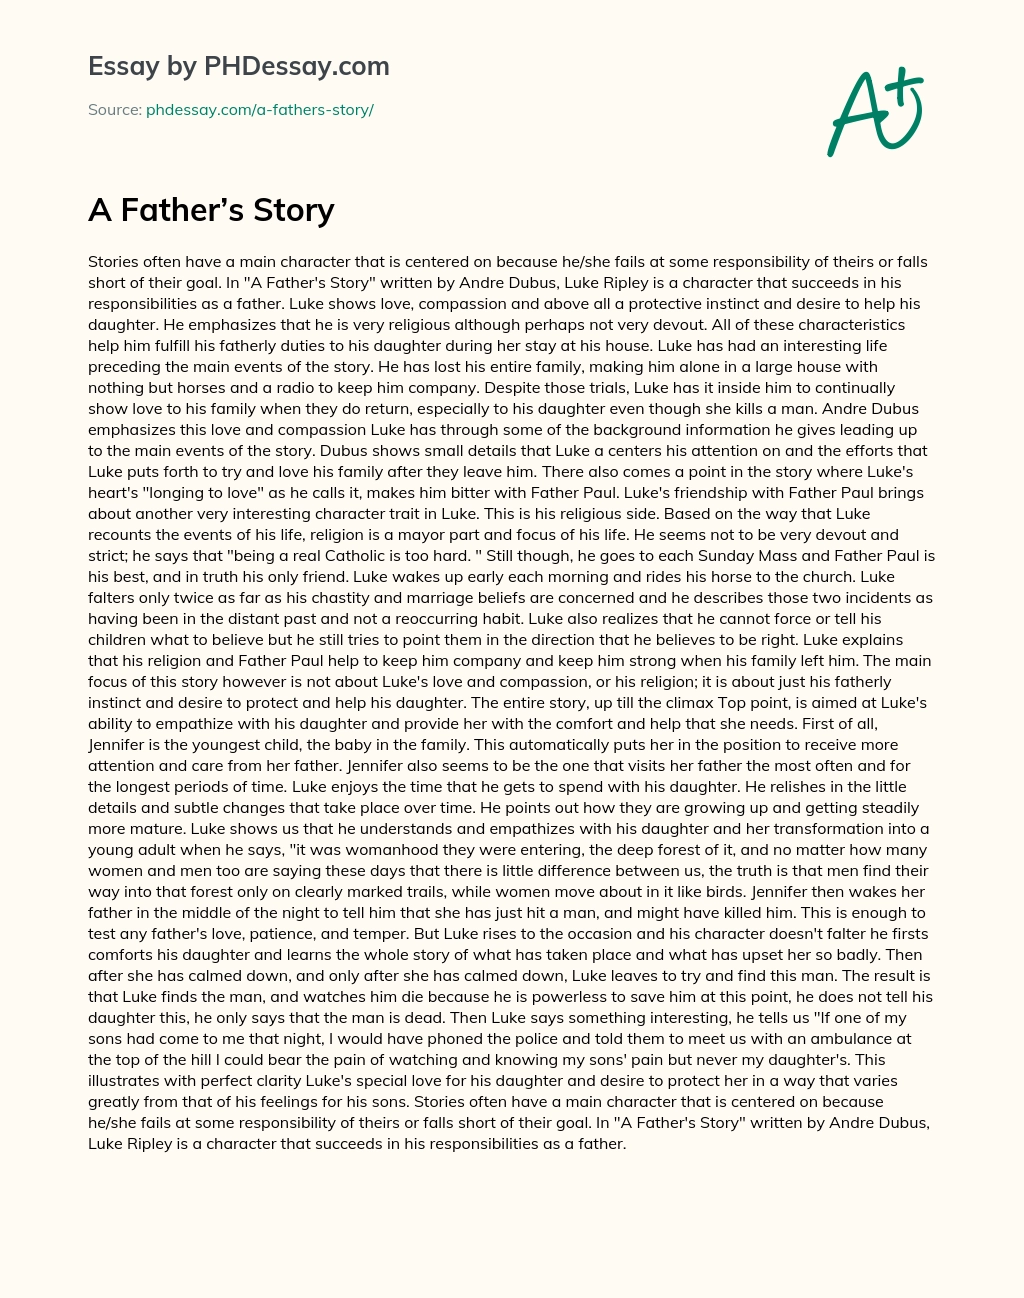 A Father’s Story essay